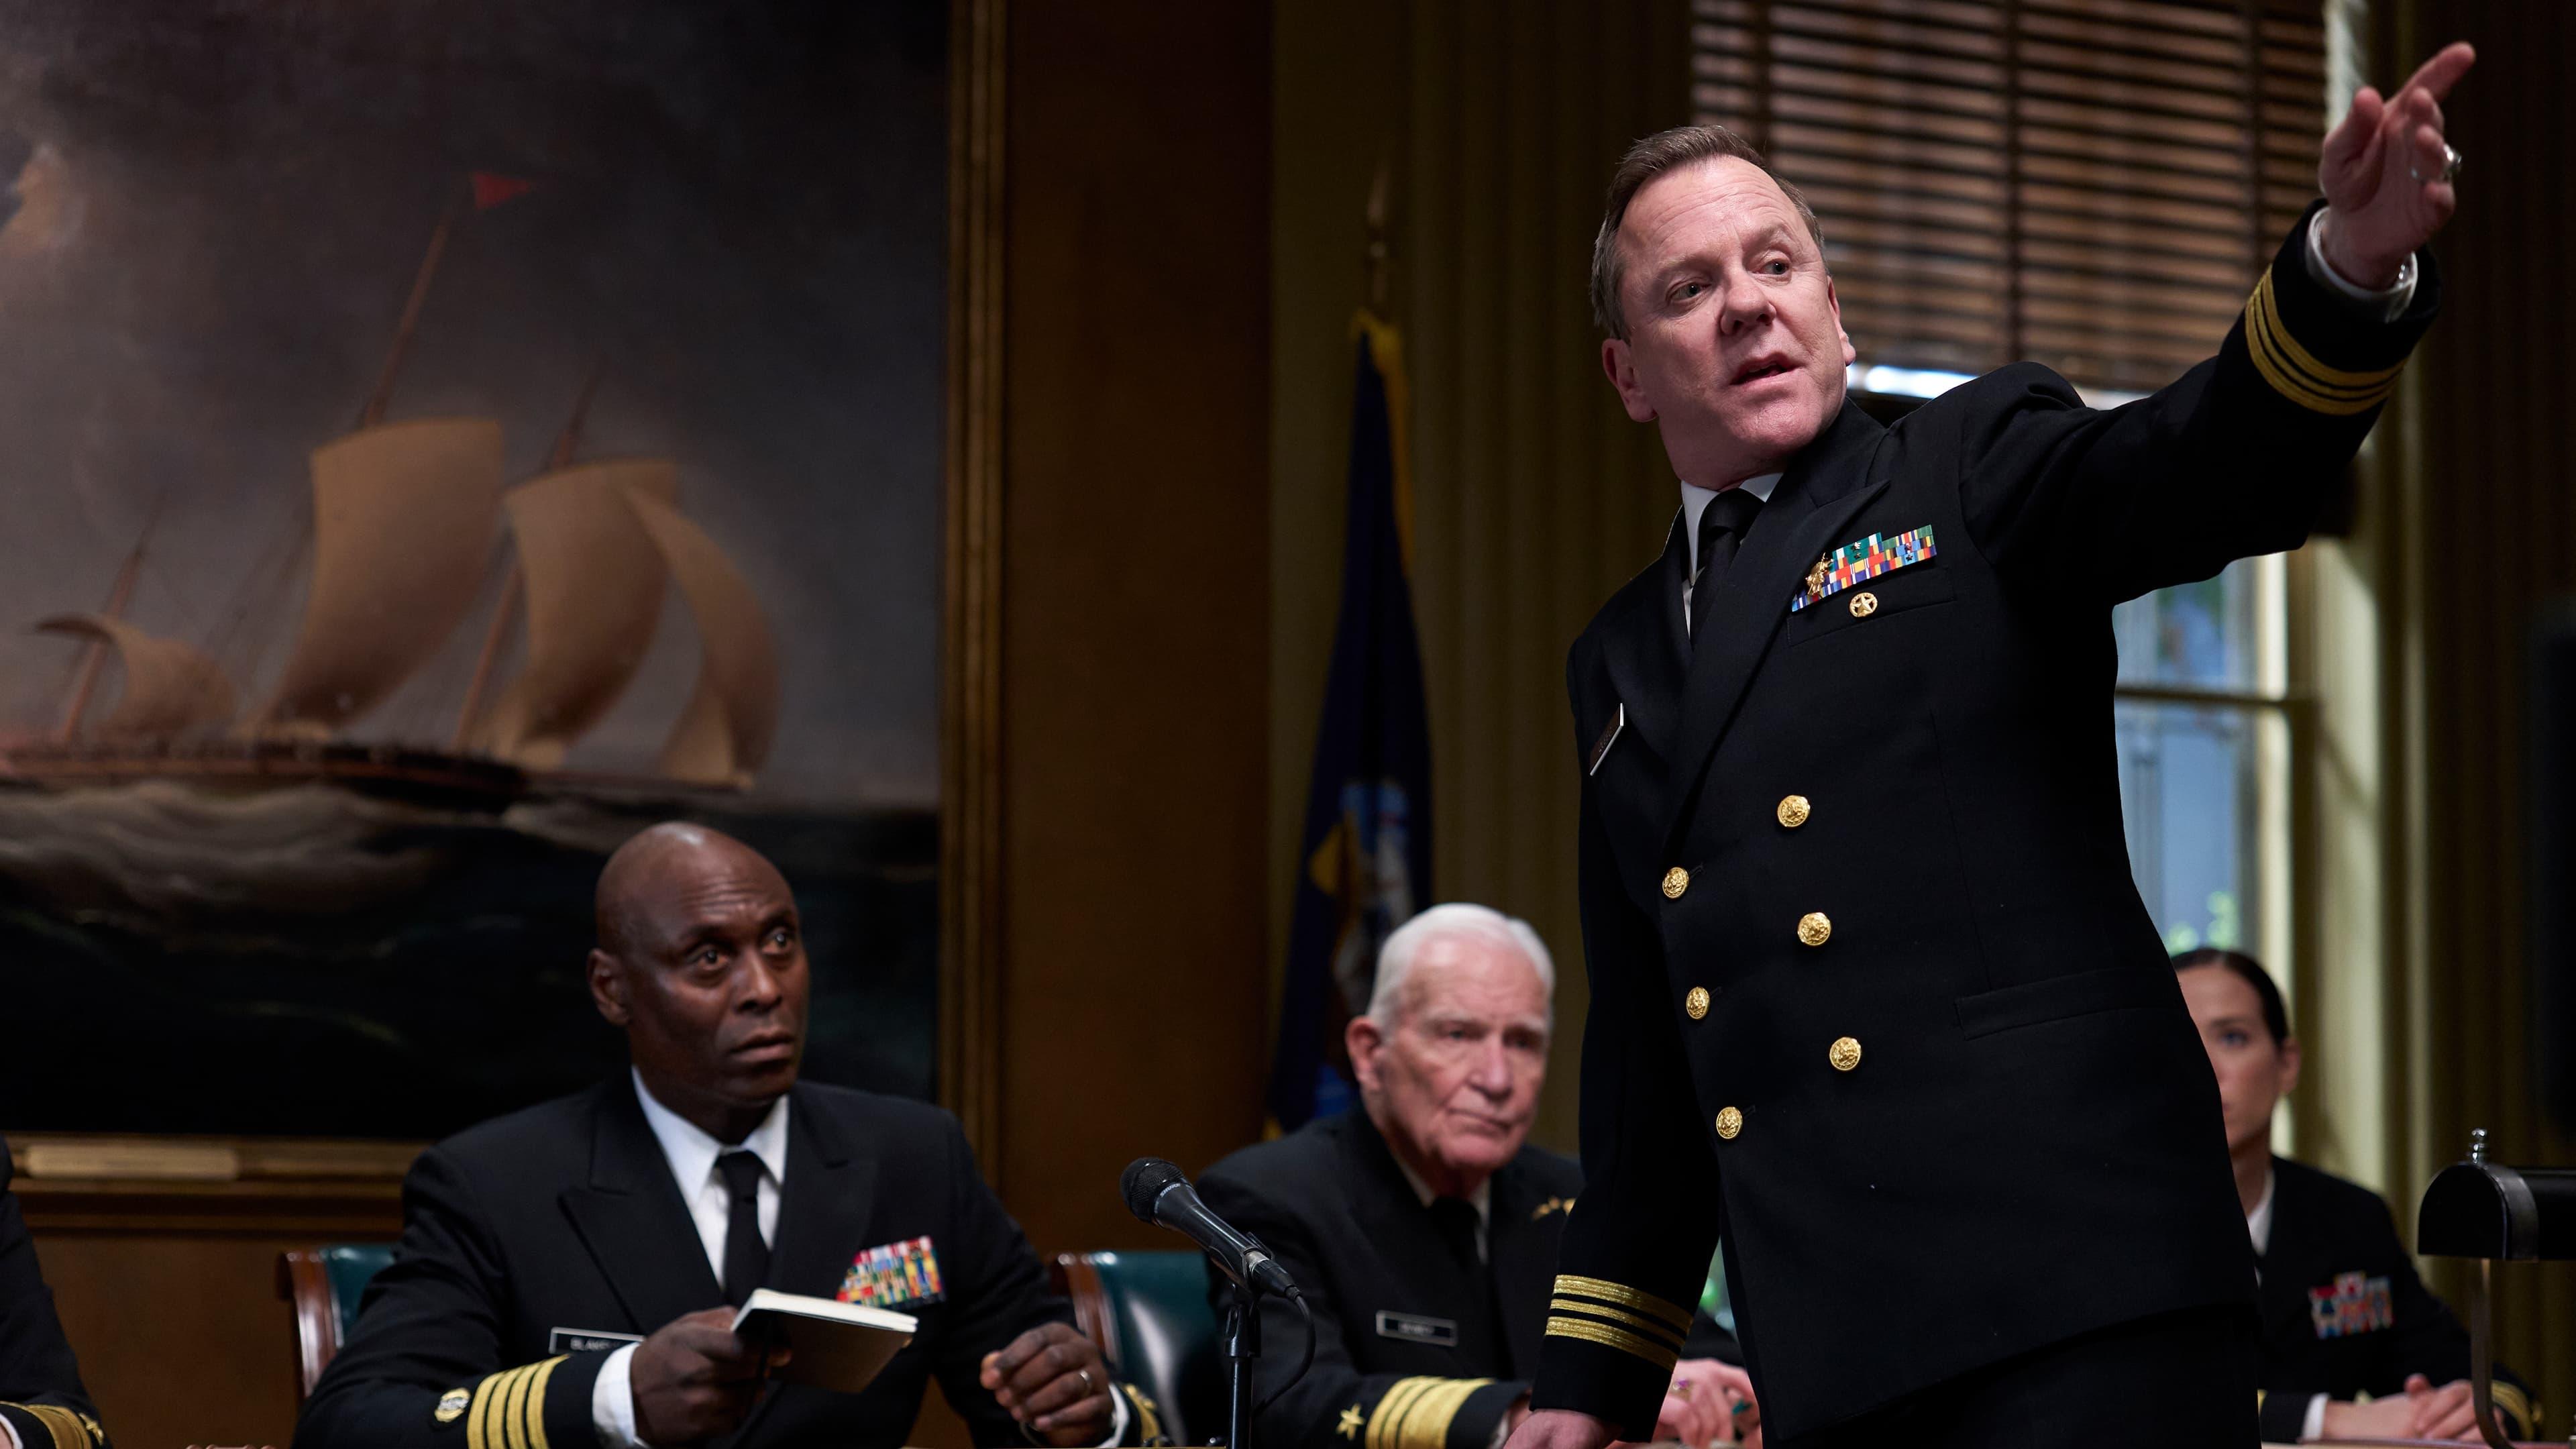 The Caine Mutiny Court-Martial backdrop